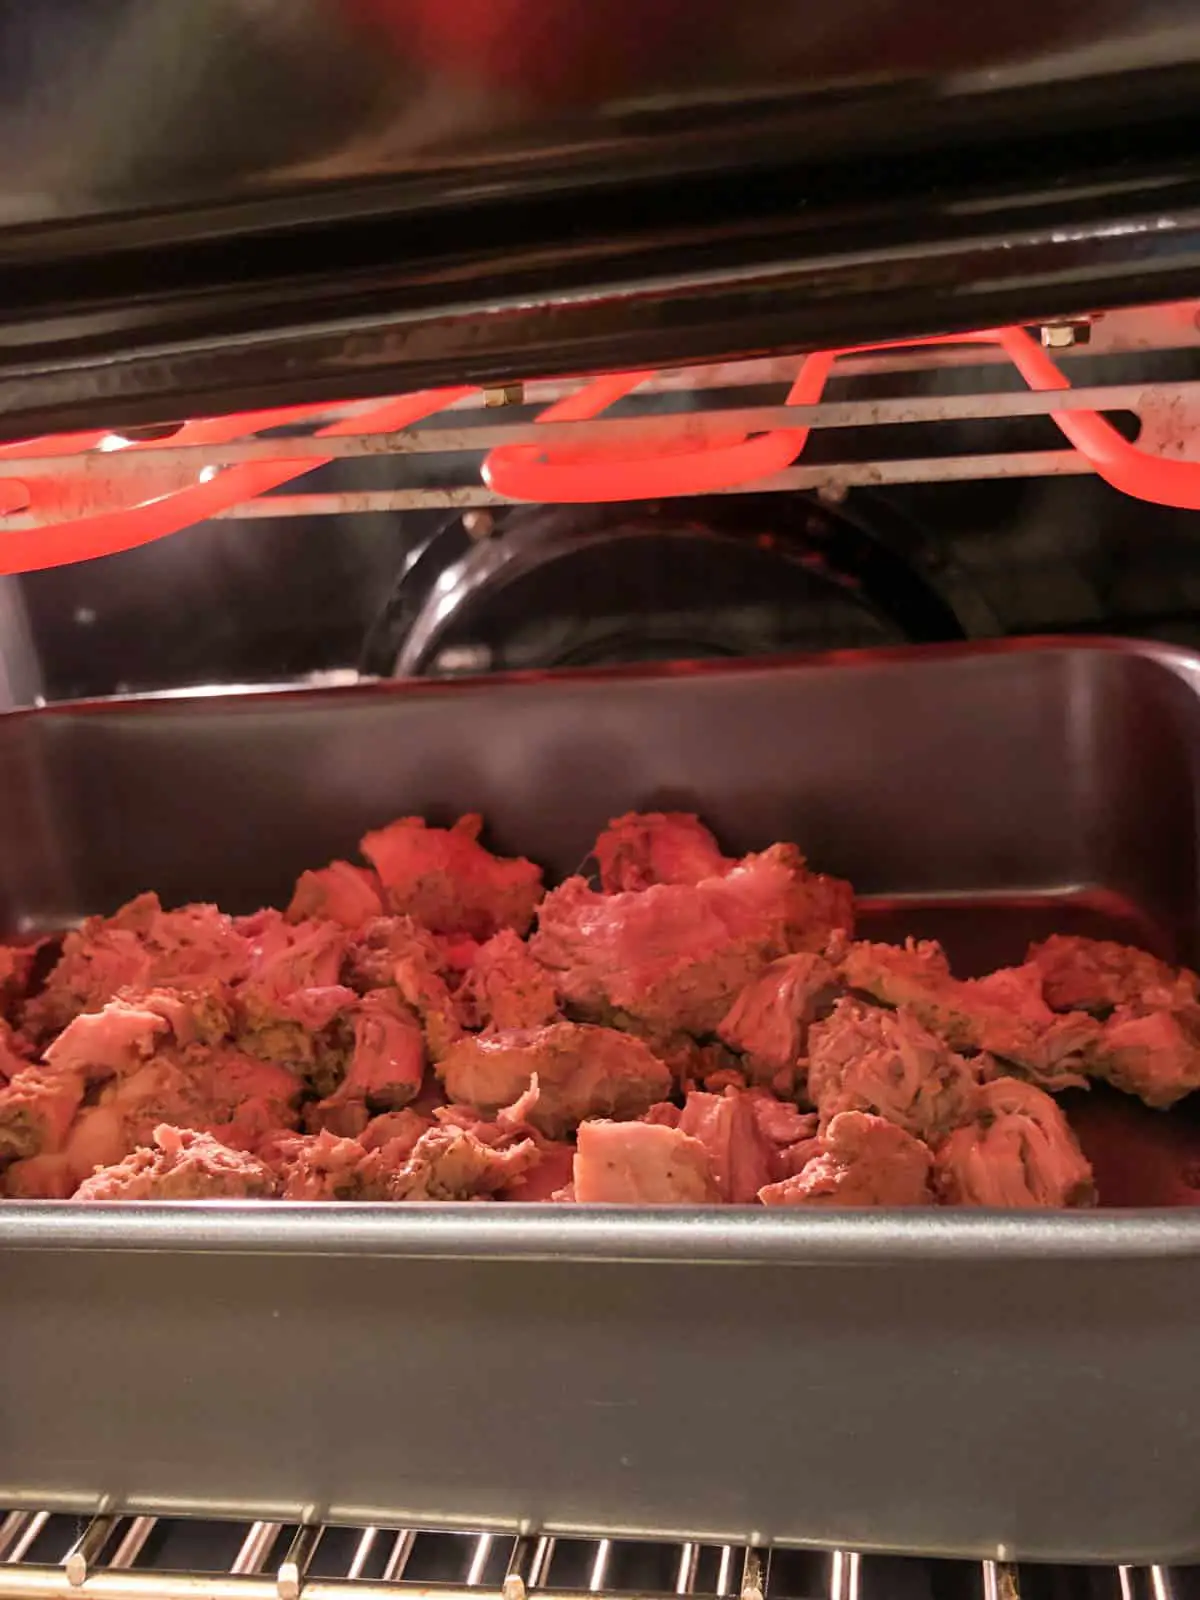 Pieces of pork in a roasting tray under a broiler.